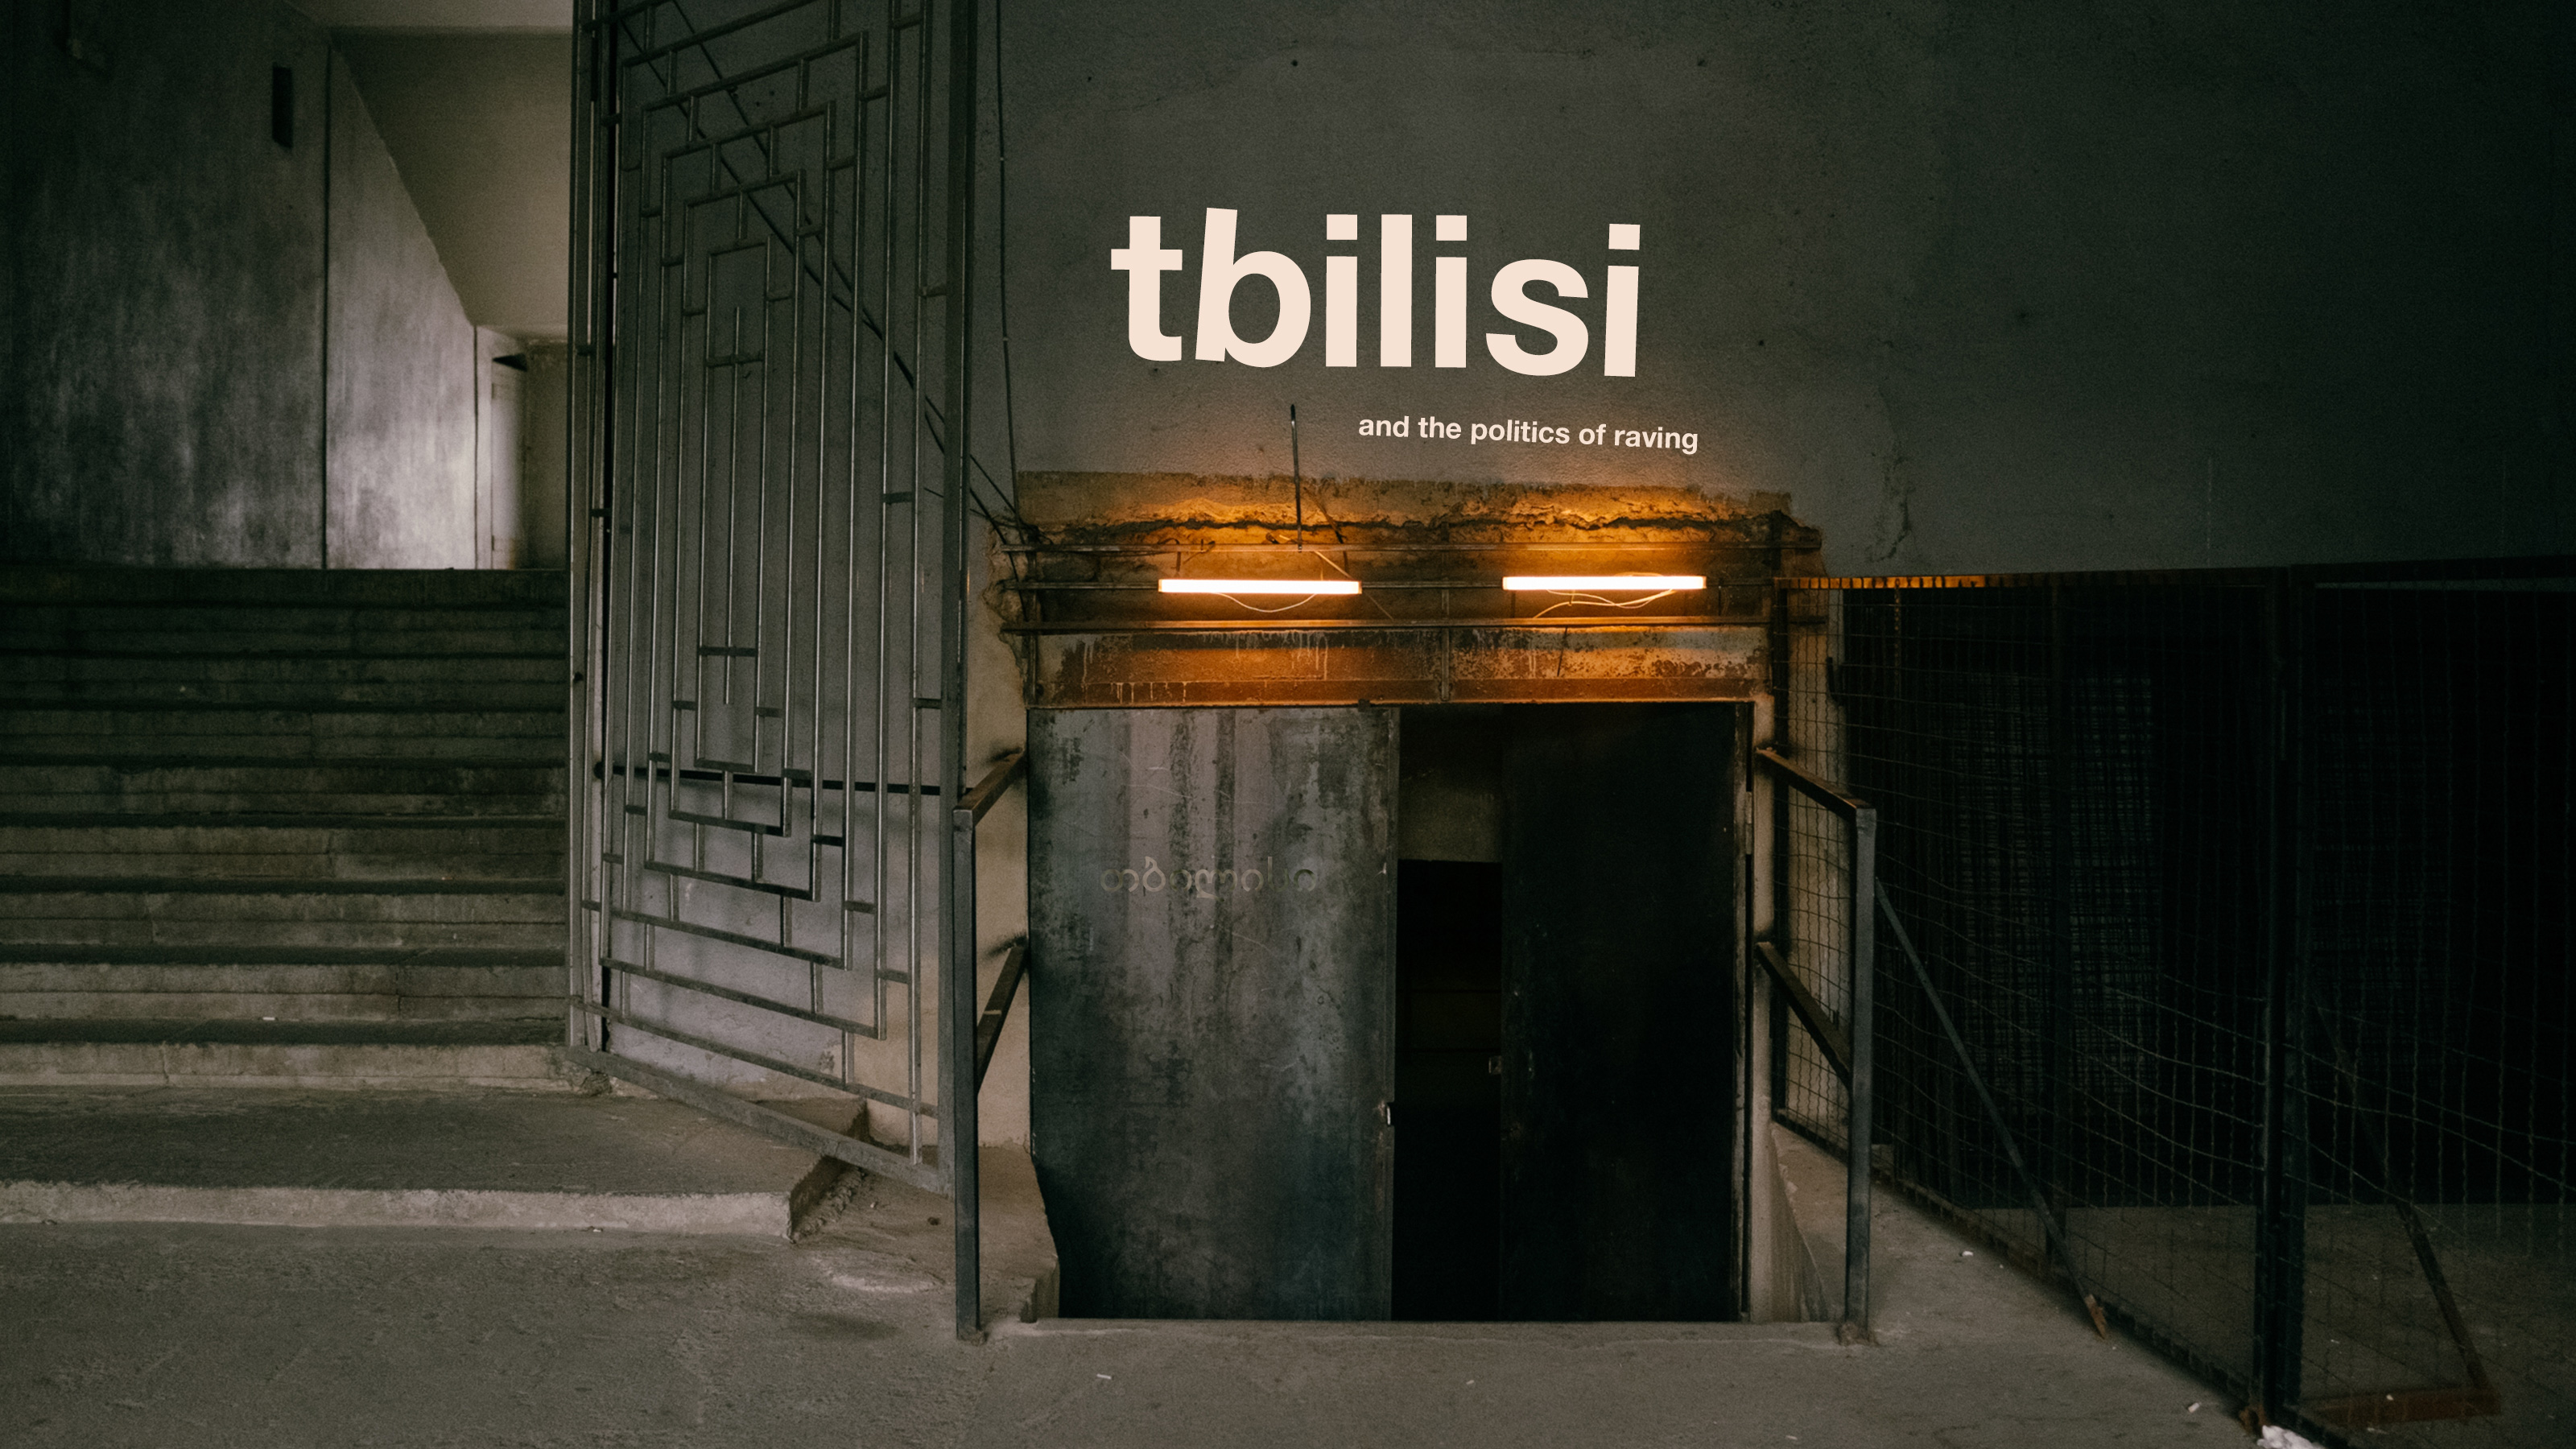 Tbilisi and the politics of raving